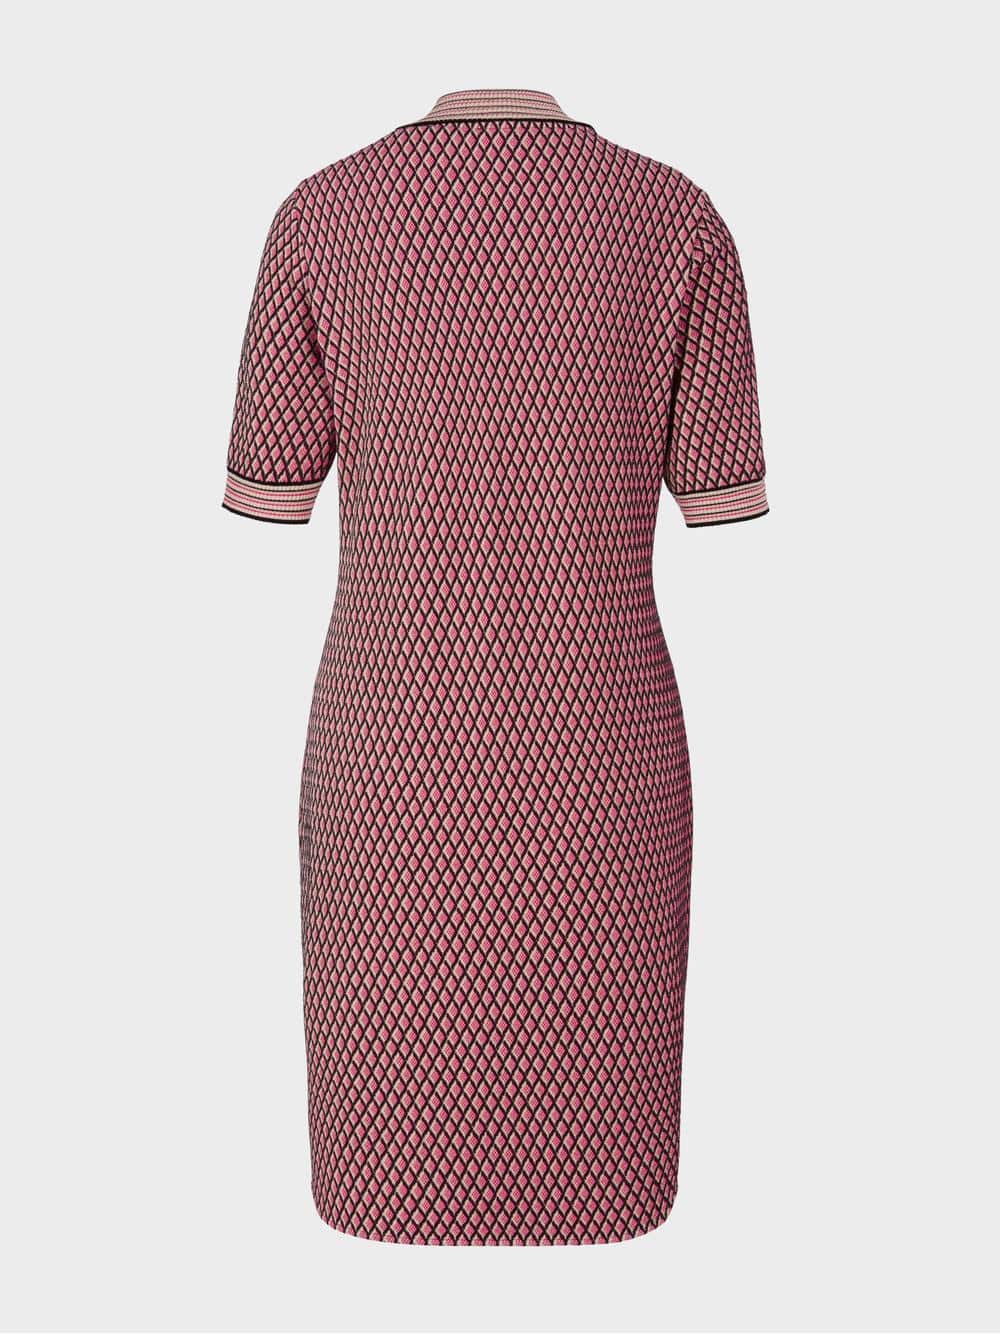 MARC CAIN POLO DRESS " KNITTED IN GERMANY"